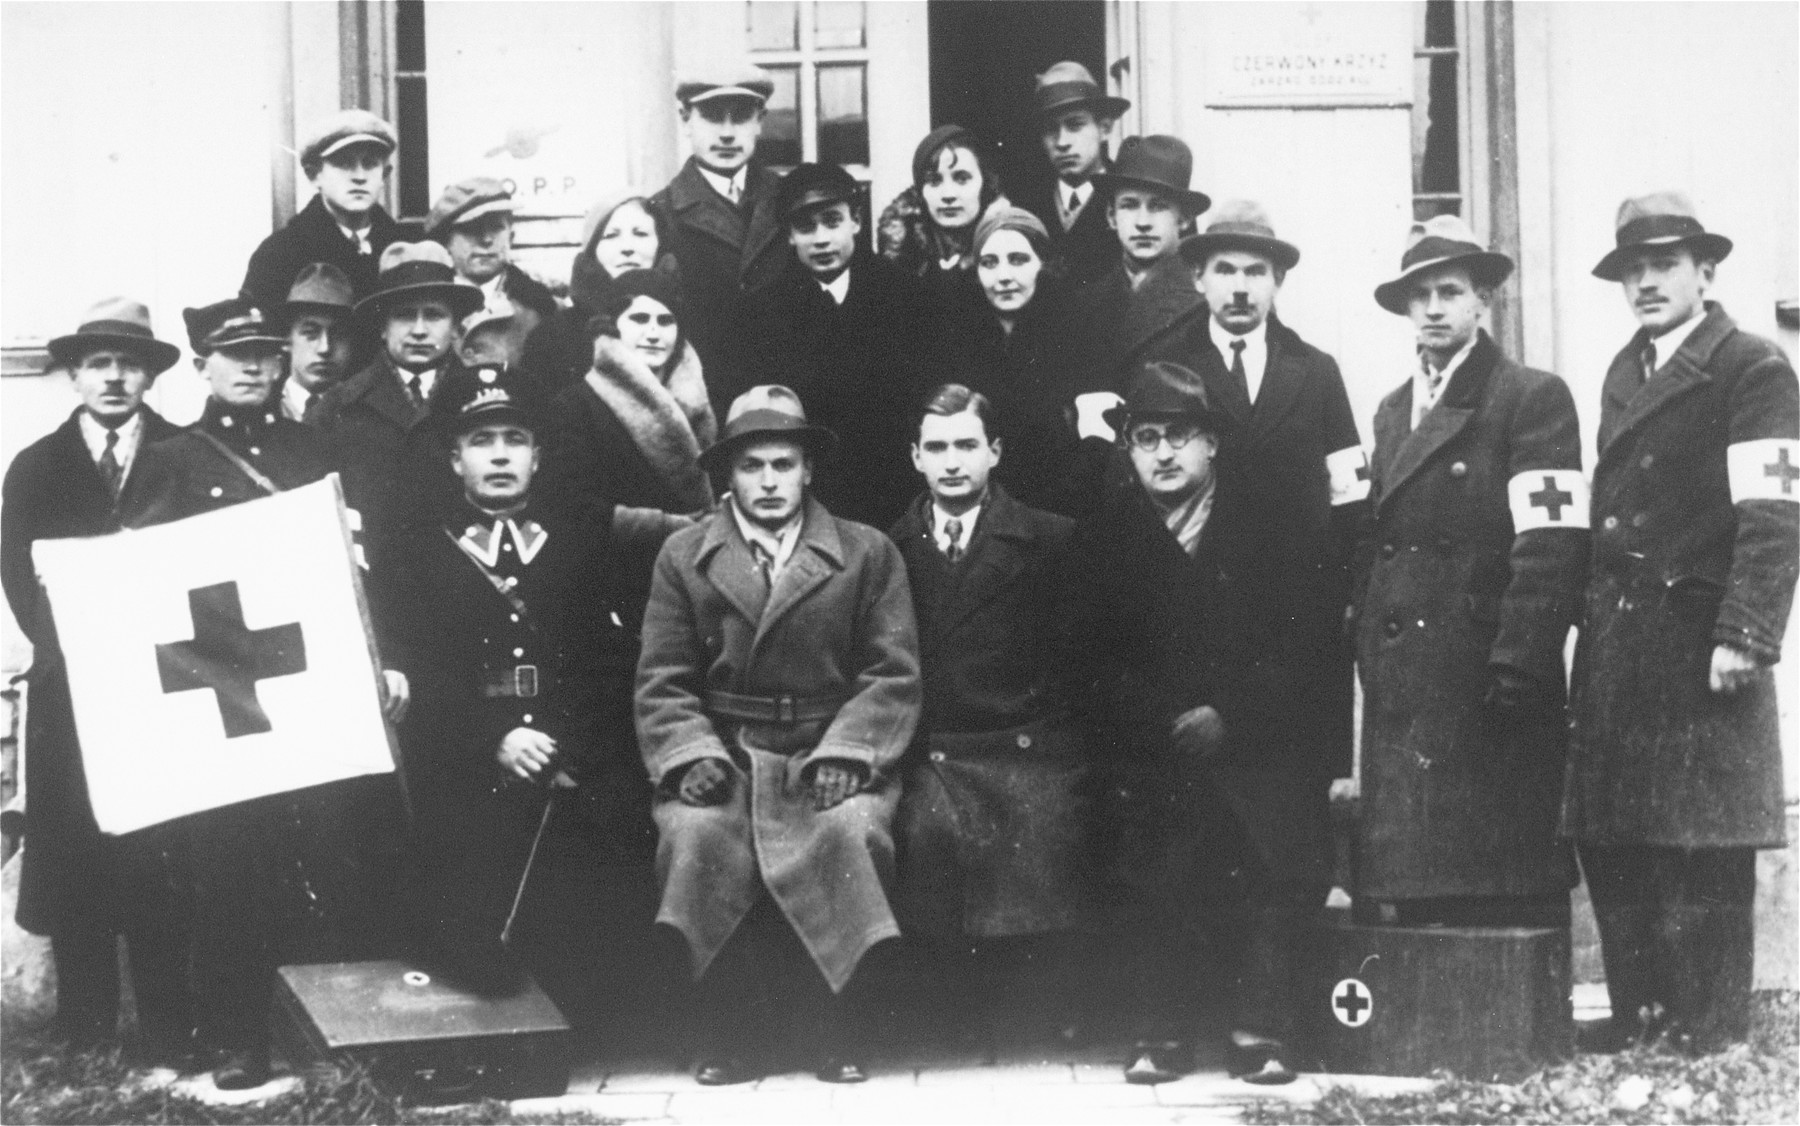 Group portrait of members of the Polish Red Cross, among them one Jew, Dr. Marek Marienstrauss, sitting on the far right.